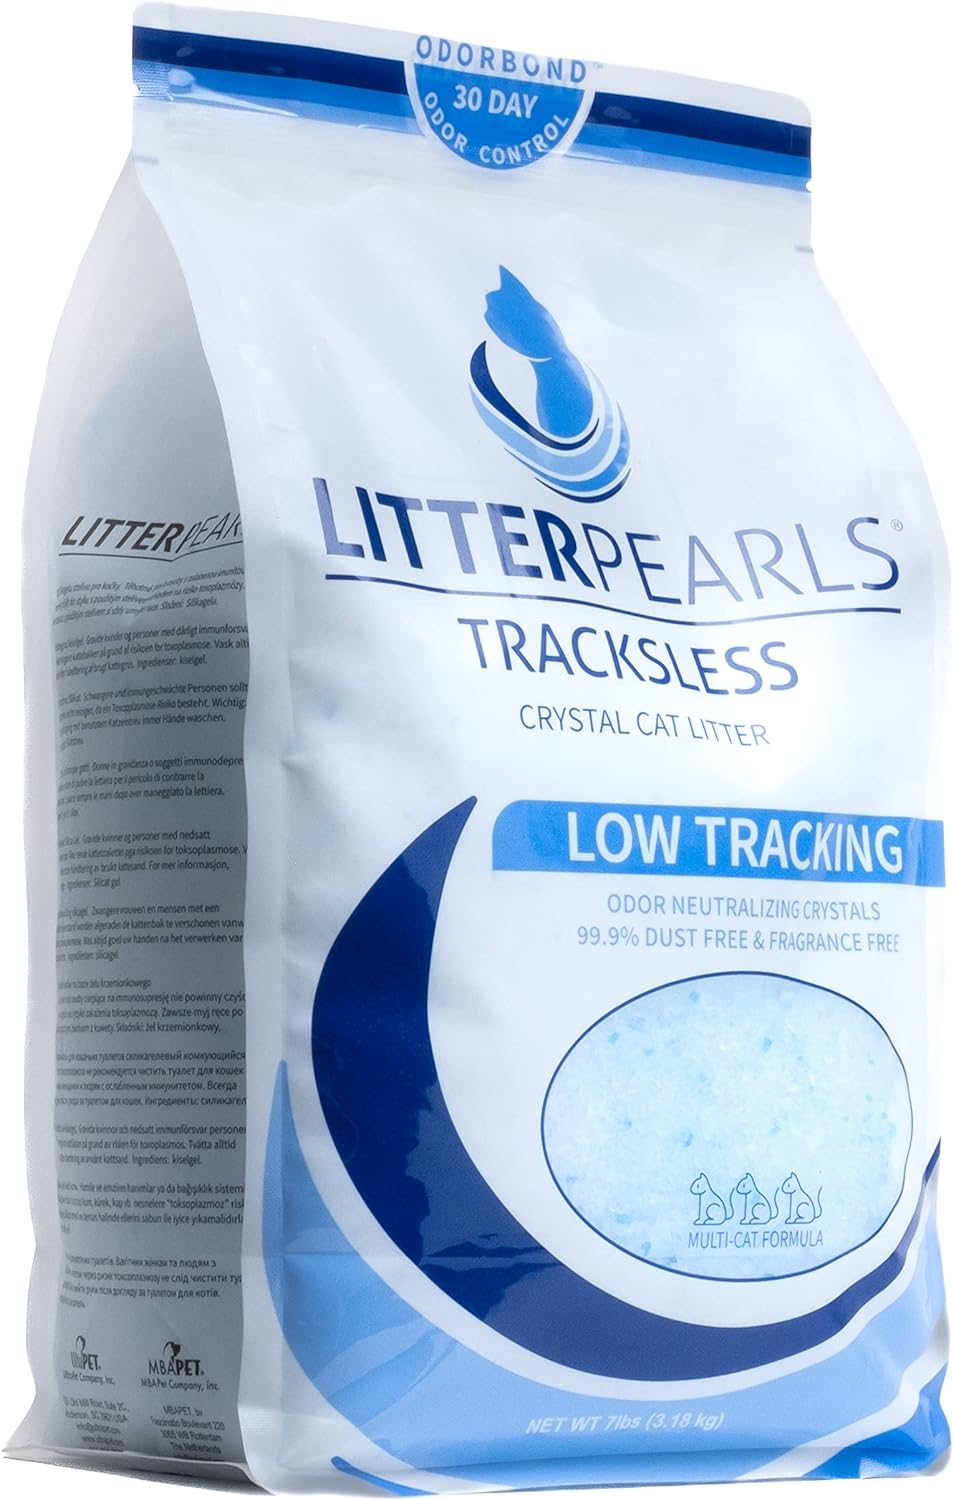 Litter Pearls Trackless Unscented Non-Clumping Crystal Cat Litter